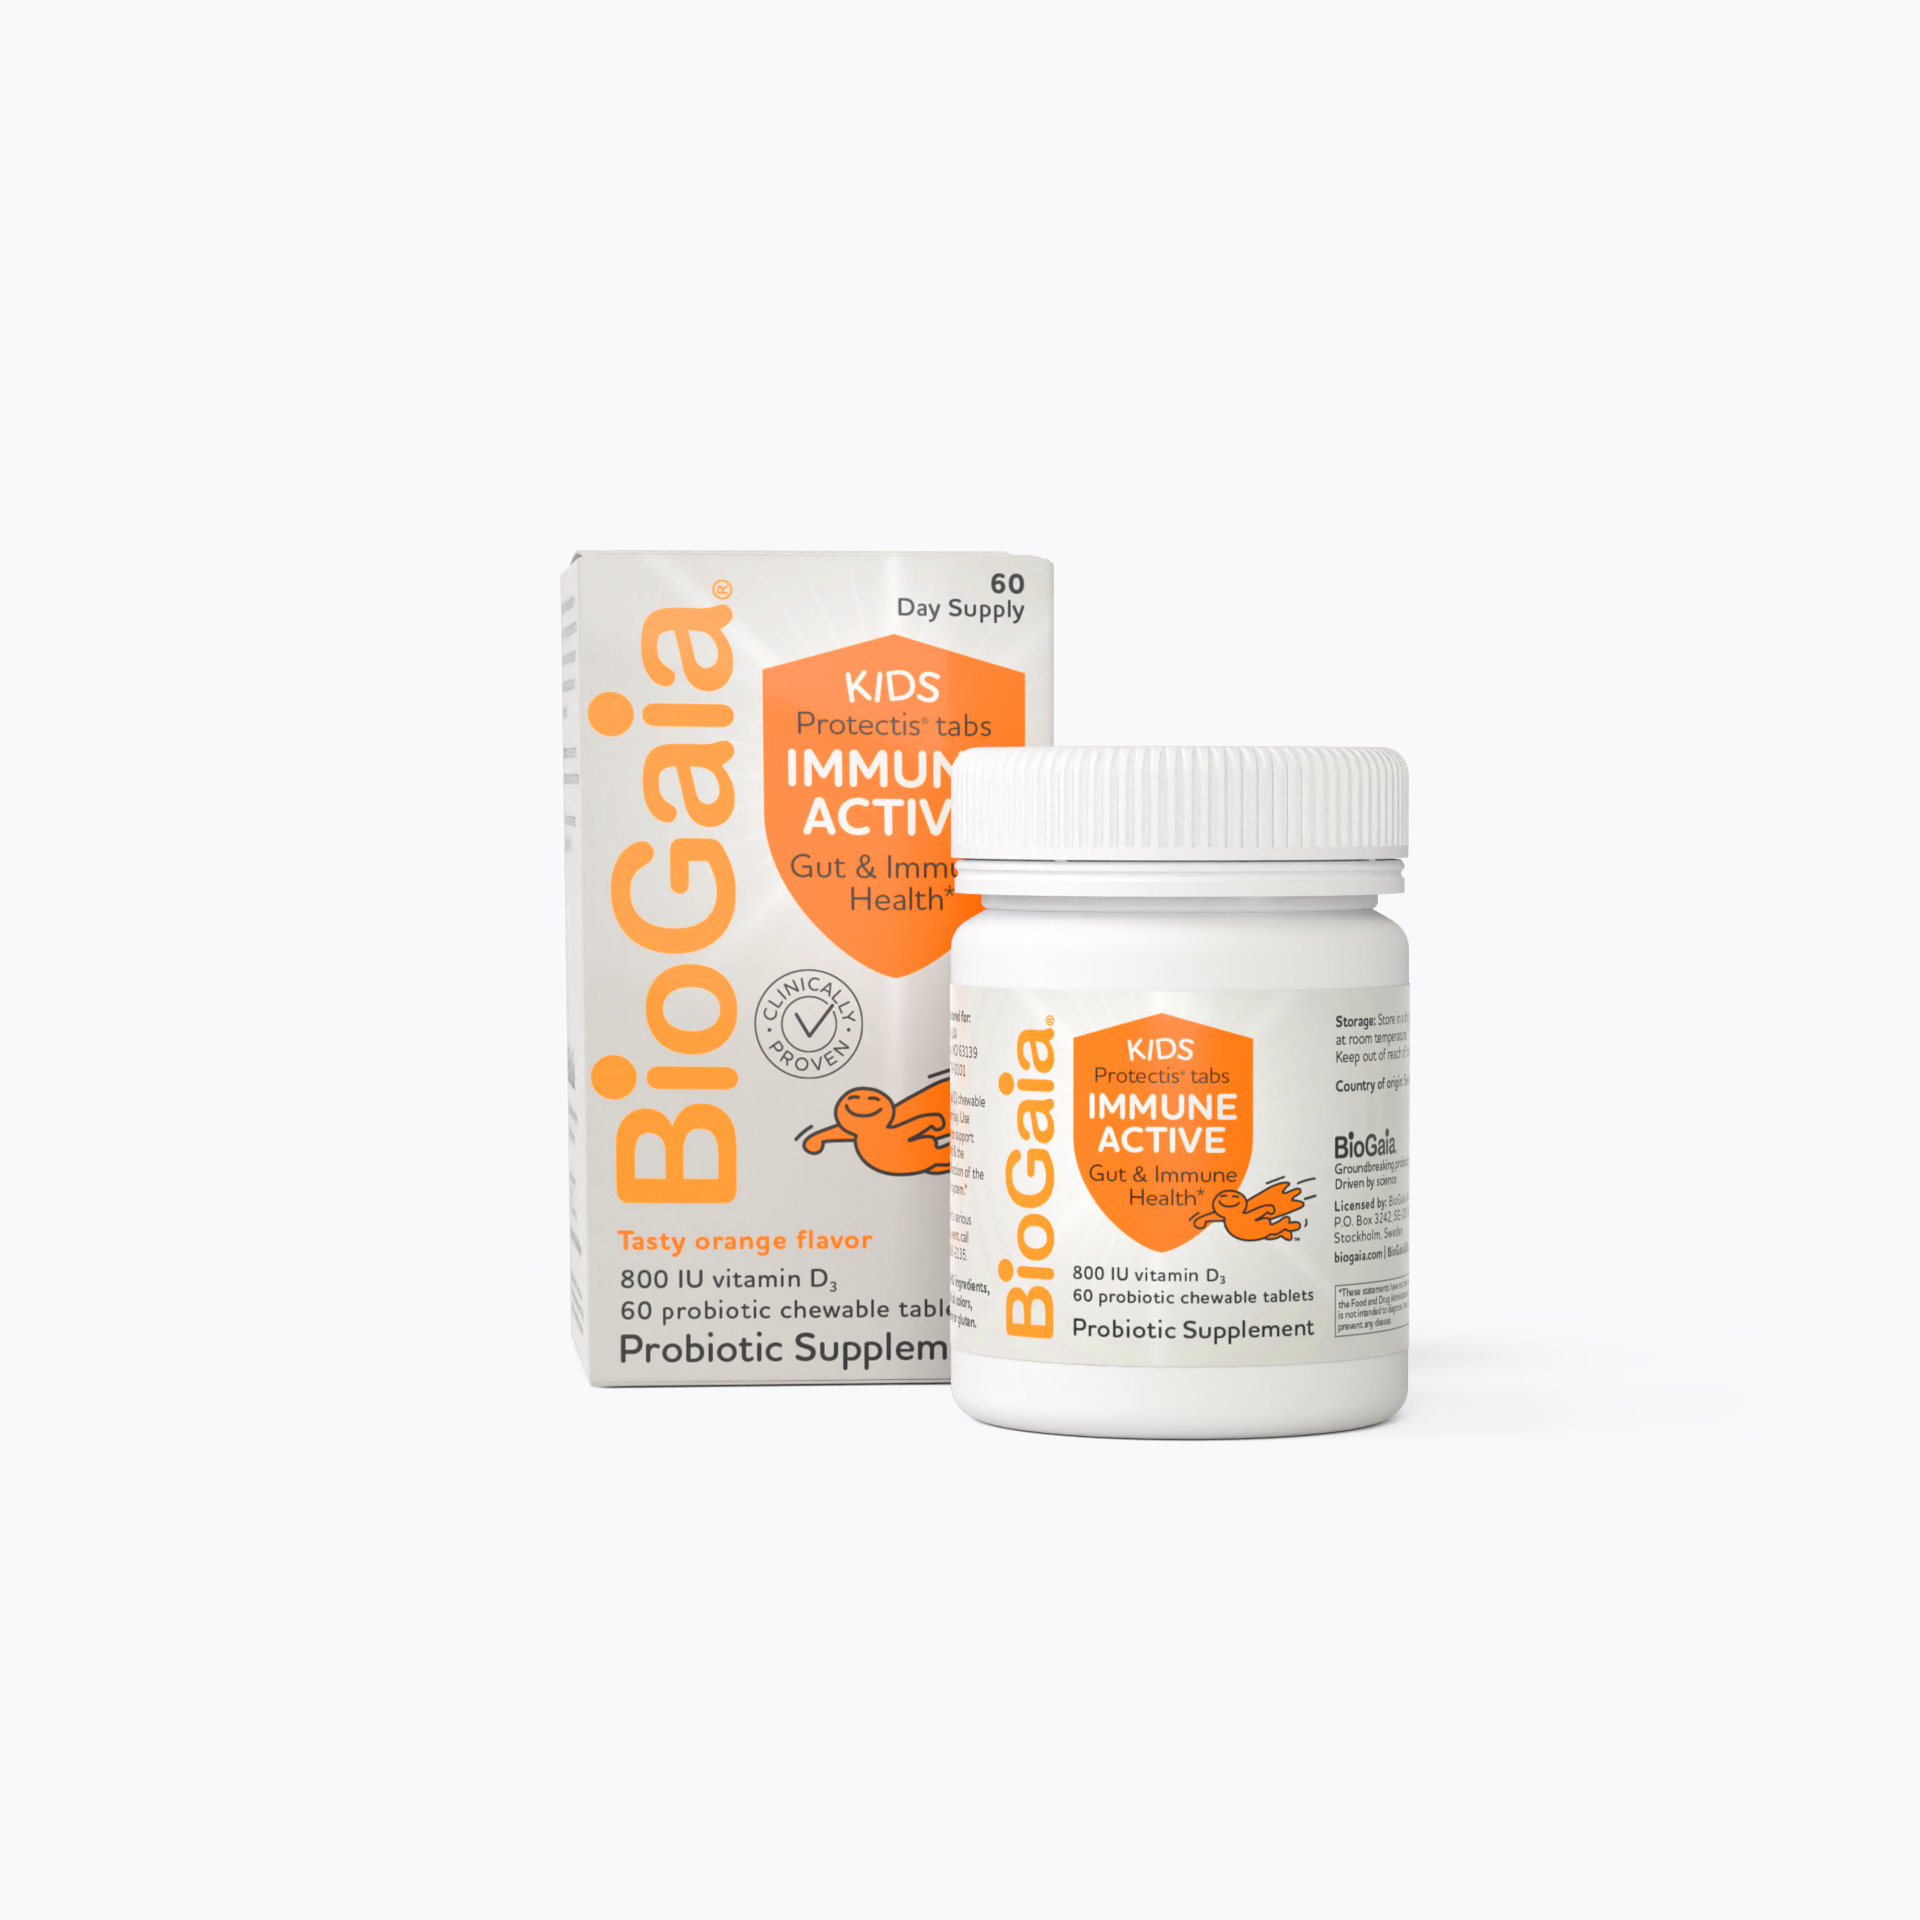 BioGaia Immune Active Kids - Probiotic supplement for gut and immune health for kids